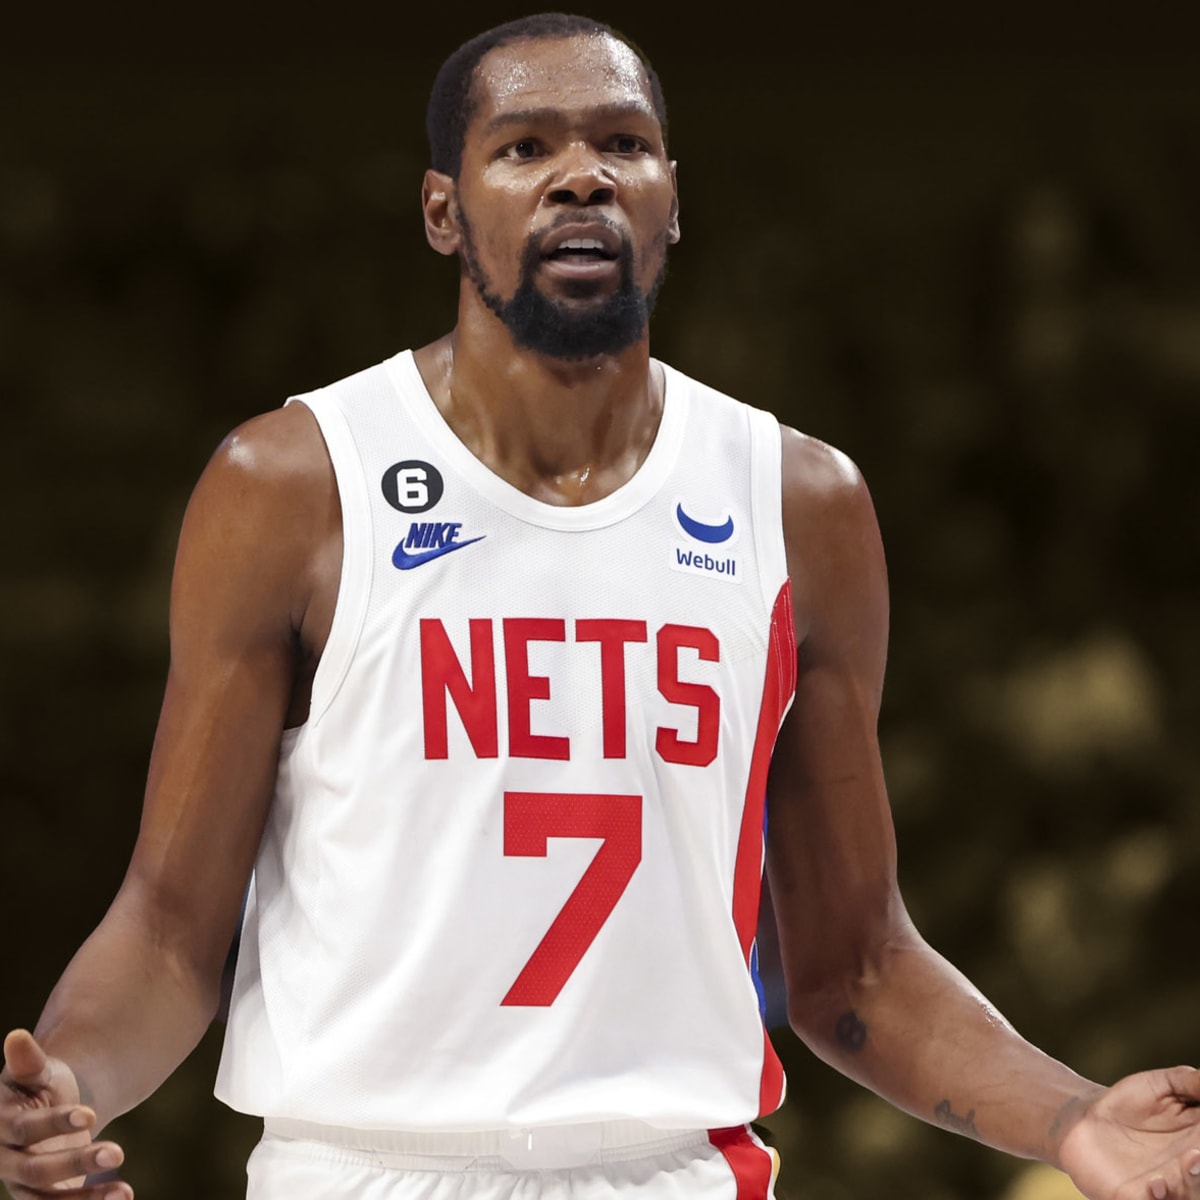 The Philadelphia 76ers' Pursuit Of Kevin Durant Is Serious, According To  Source: When KD Made That Ultimatum, The Sixers Were Right On The Phone.  - Fadeaway World